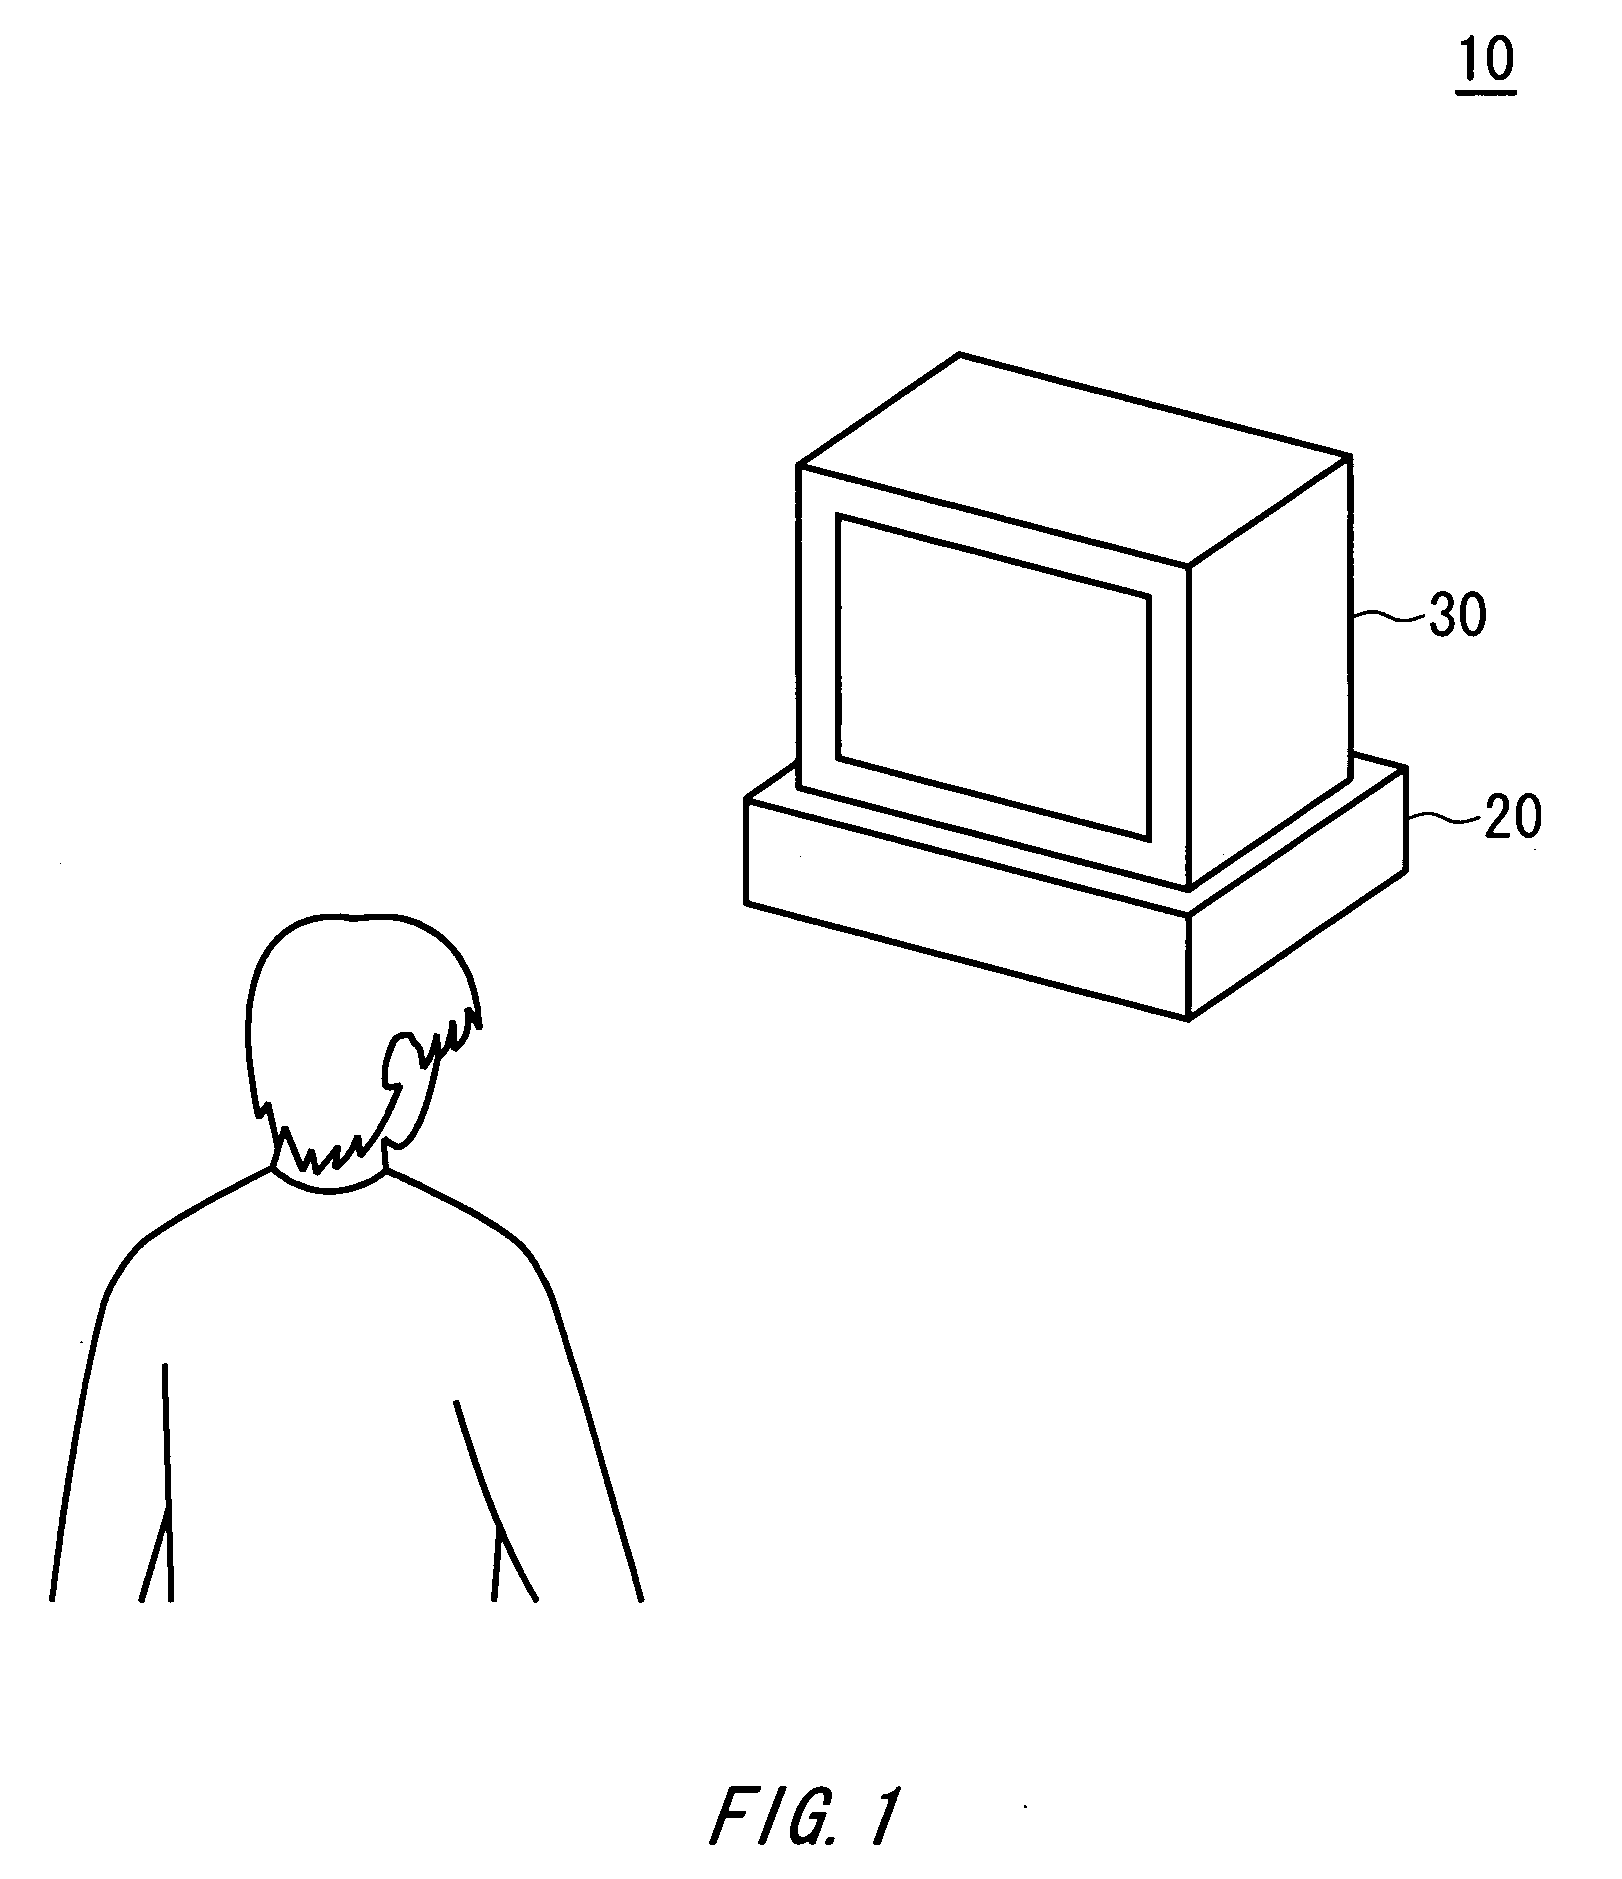 Electronic album display system, an image grouping apparatus, an electronic album display method, an image grouping method, and a machine readable medium storing thereon a computer program